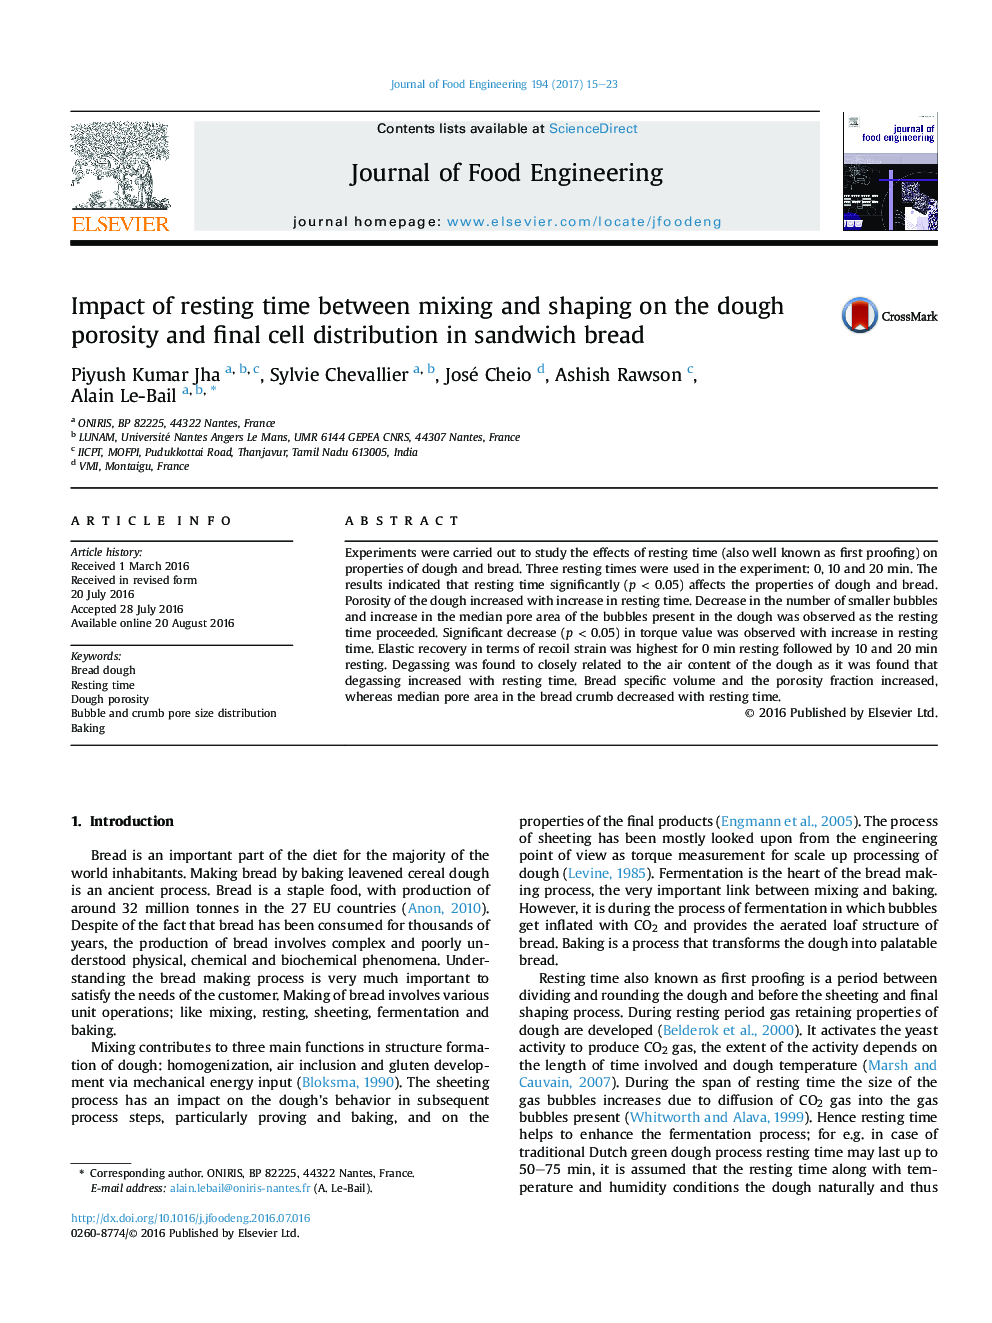 Impact of resting time between mixing and shaping on the dough porosity and final cell distribution in sandwich bread